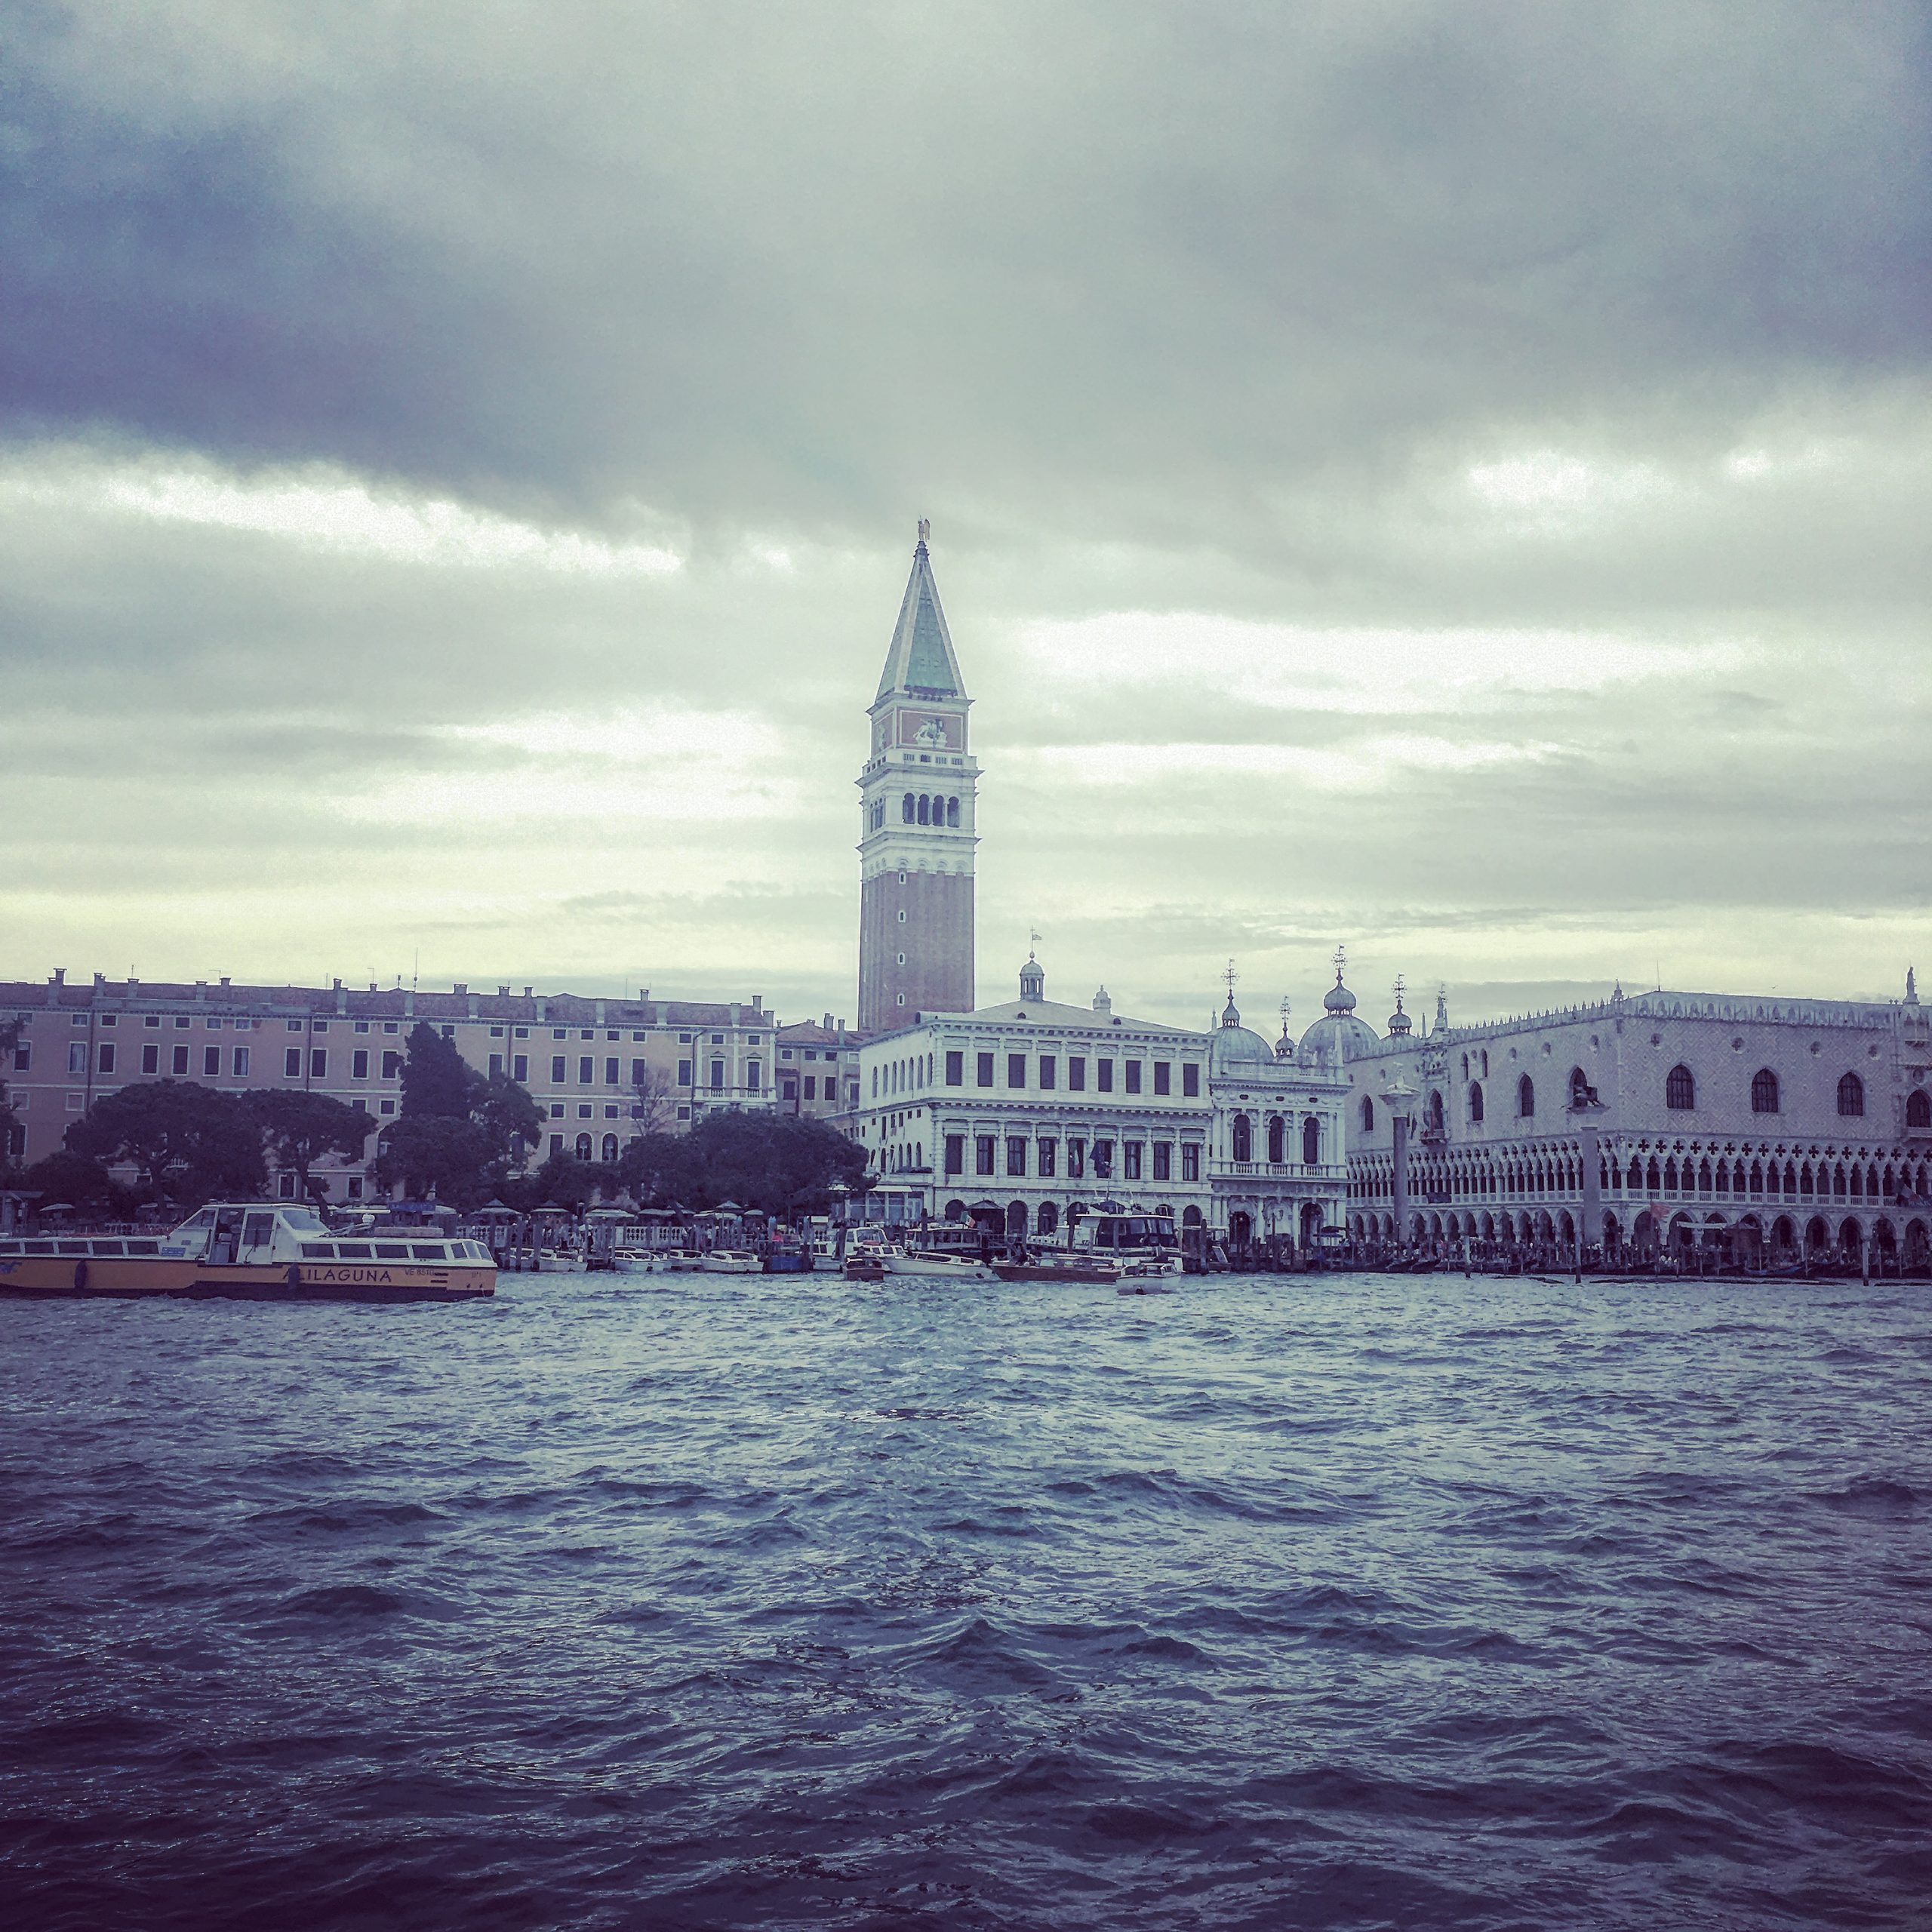 Approaching St Mark’s Square from the water bus